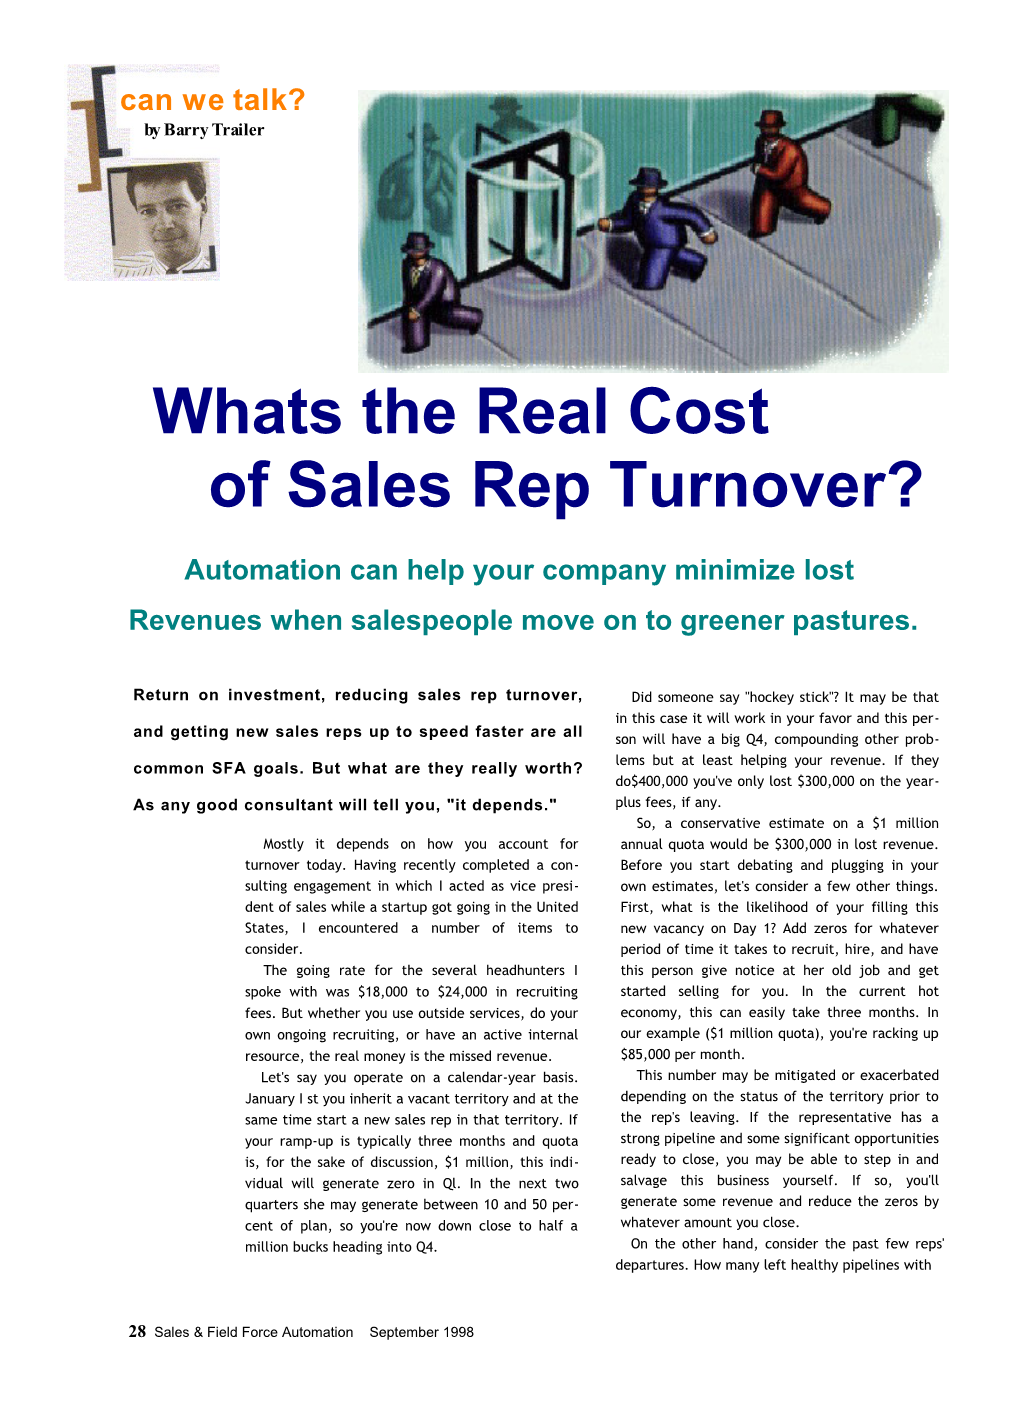 What's the Real Cost of Sales Rep Turnover?